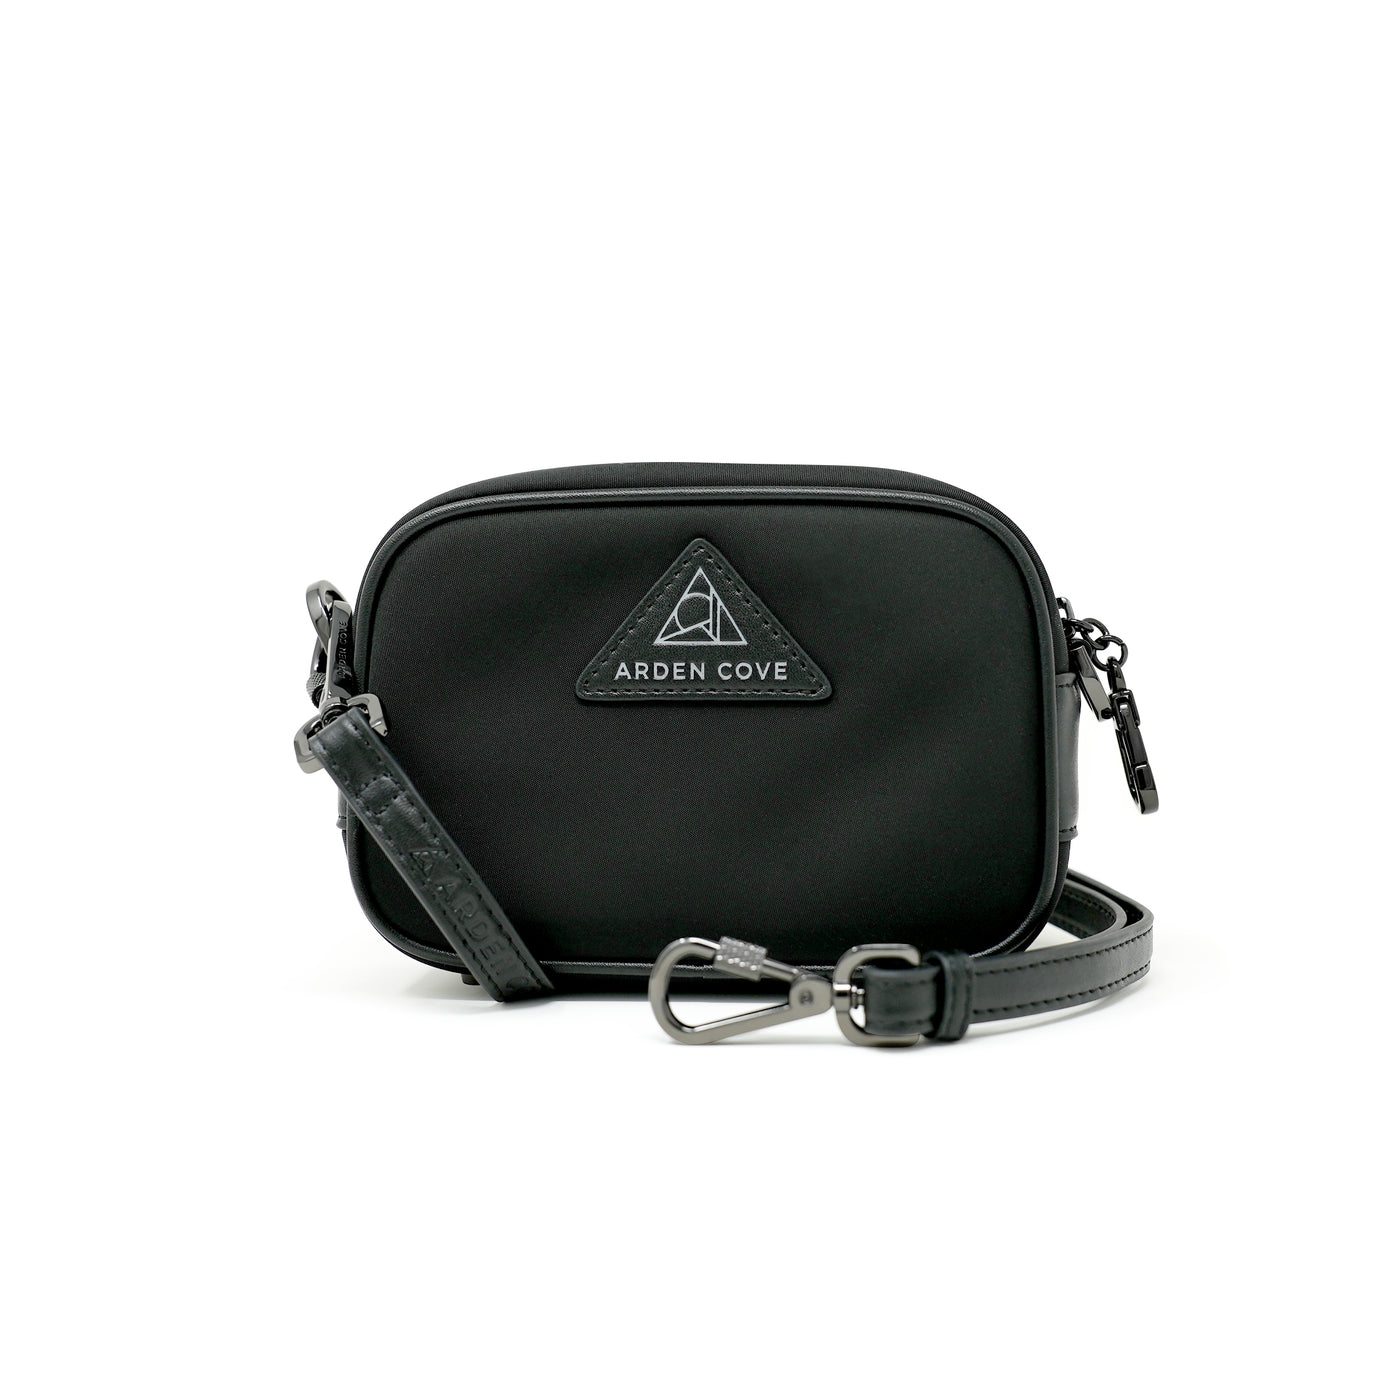 Anti-theft Water-resistant Travel Crossbody - Crissy Mini Crossbody in Black Gunmetal with slash-resistant faux leather & locking clasps straps - front view - Arden Cove